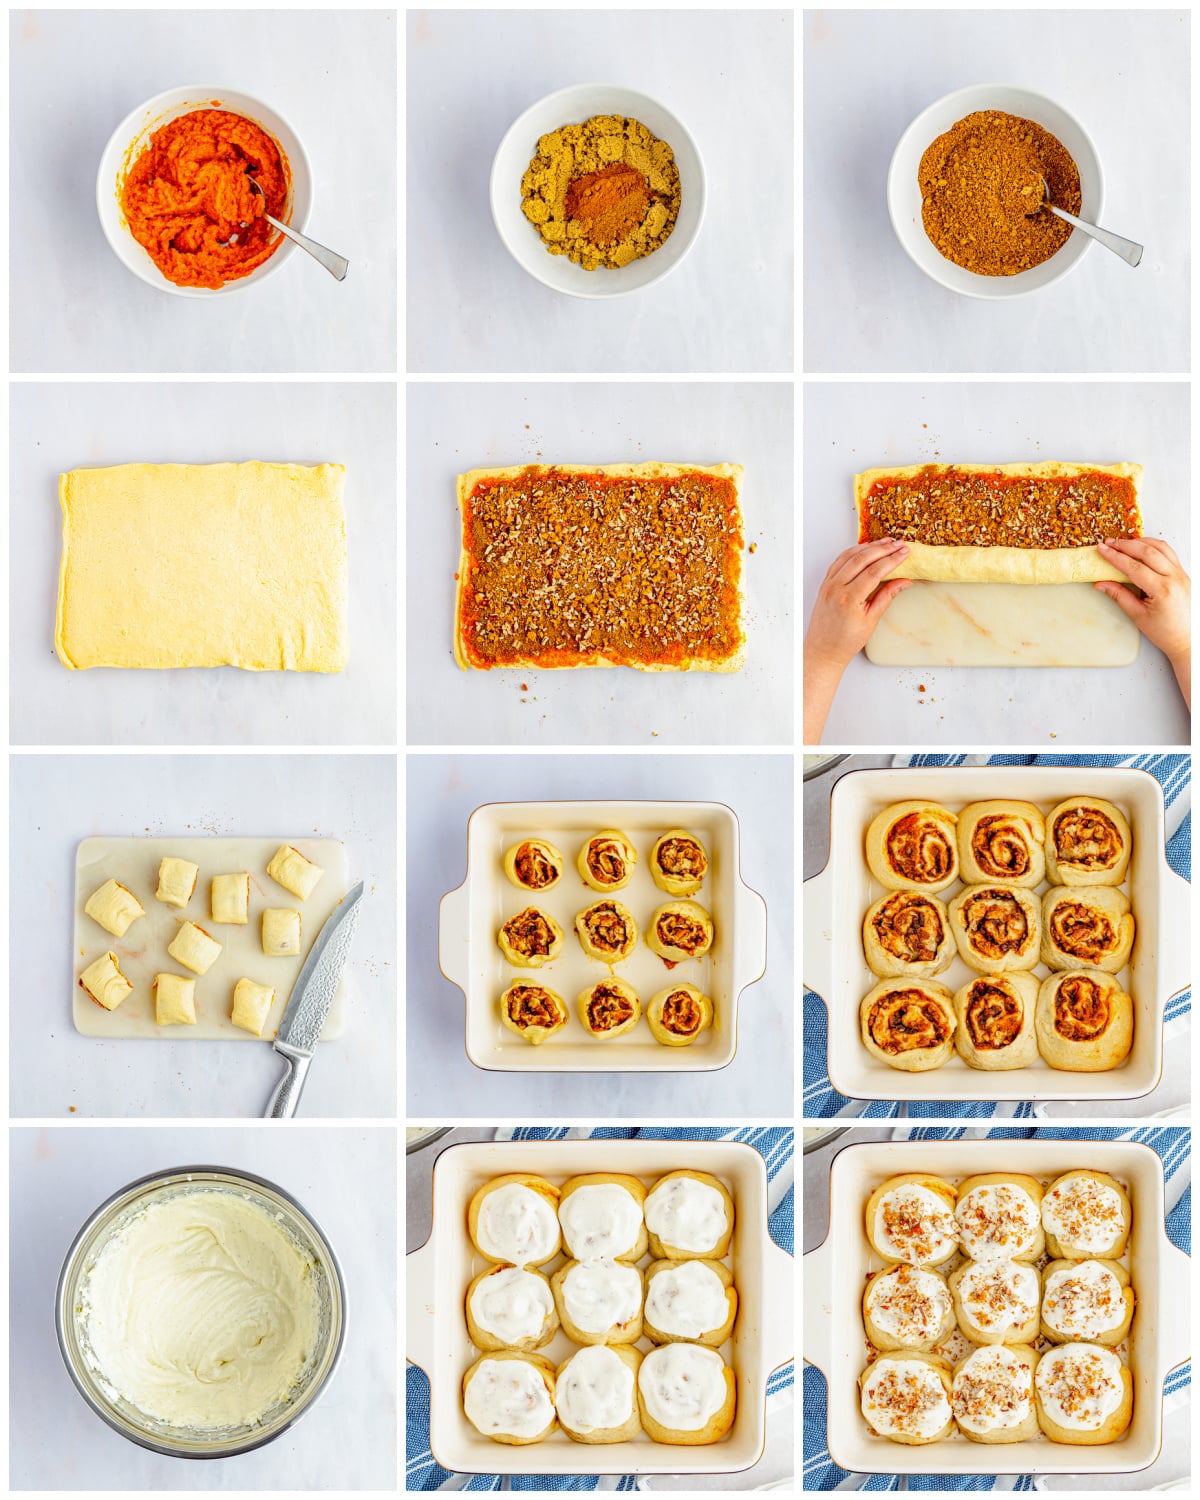 Step by step photos on how to make Pumpkin Cinnamon Rolls.